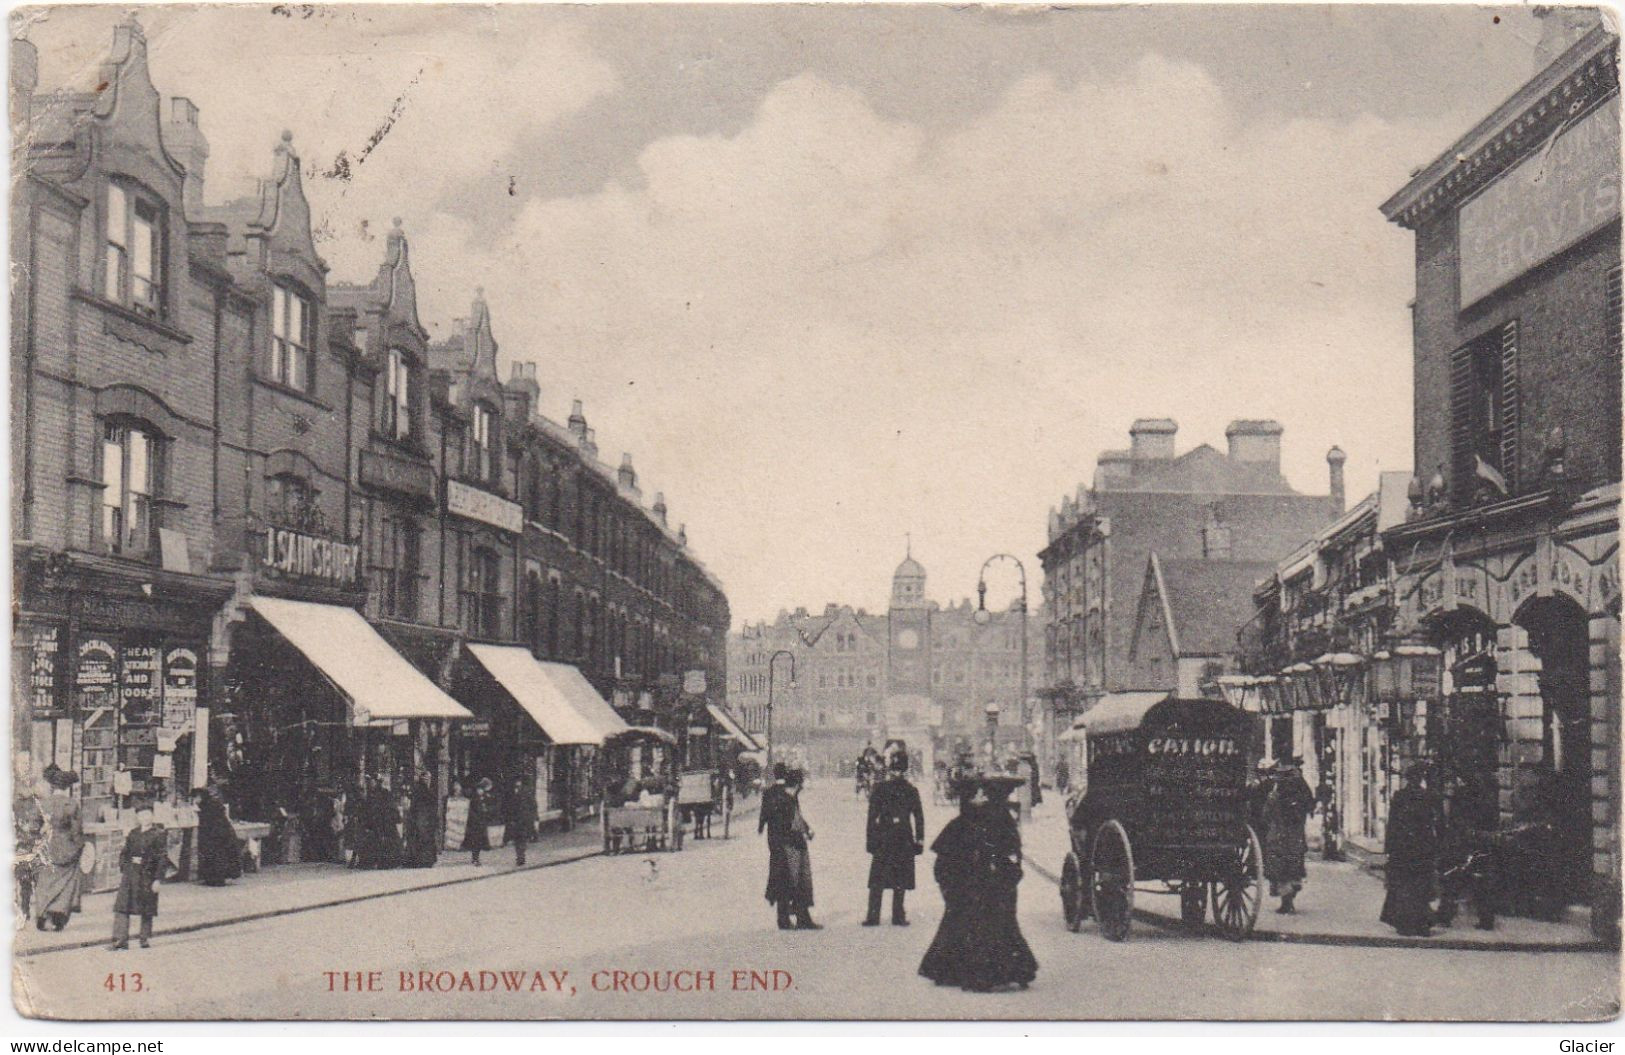 The Broadway, Crouch End - London - London Suburbs